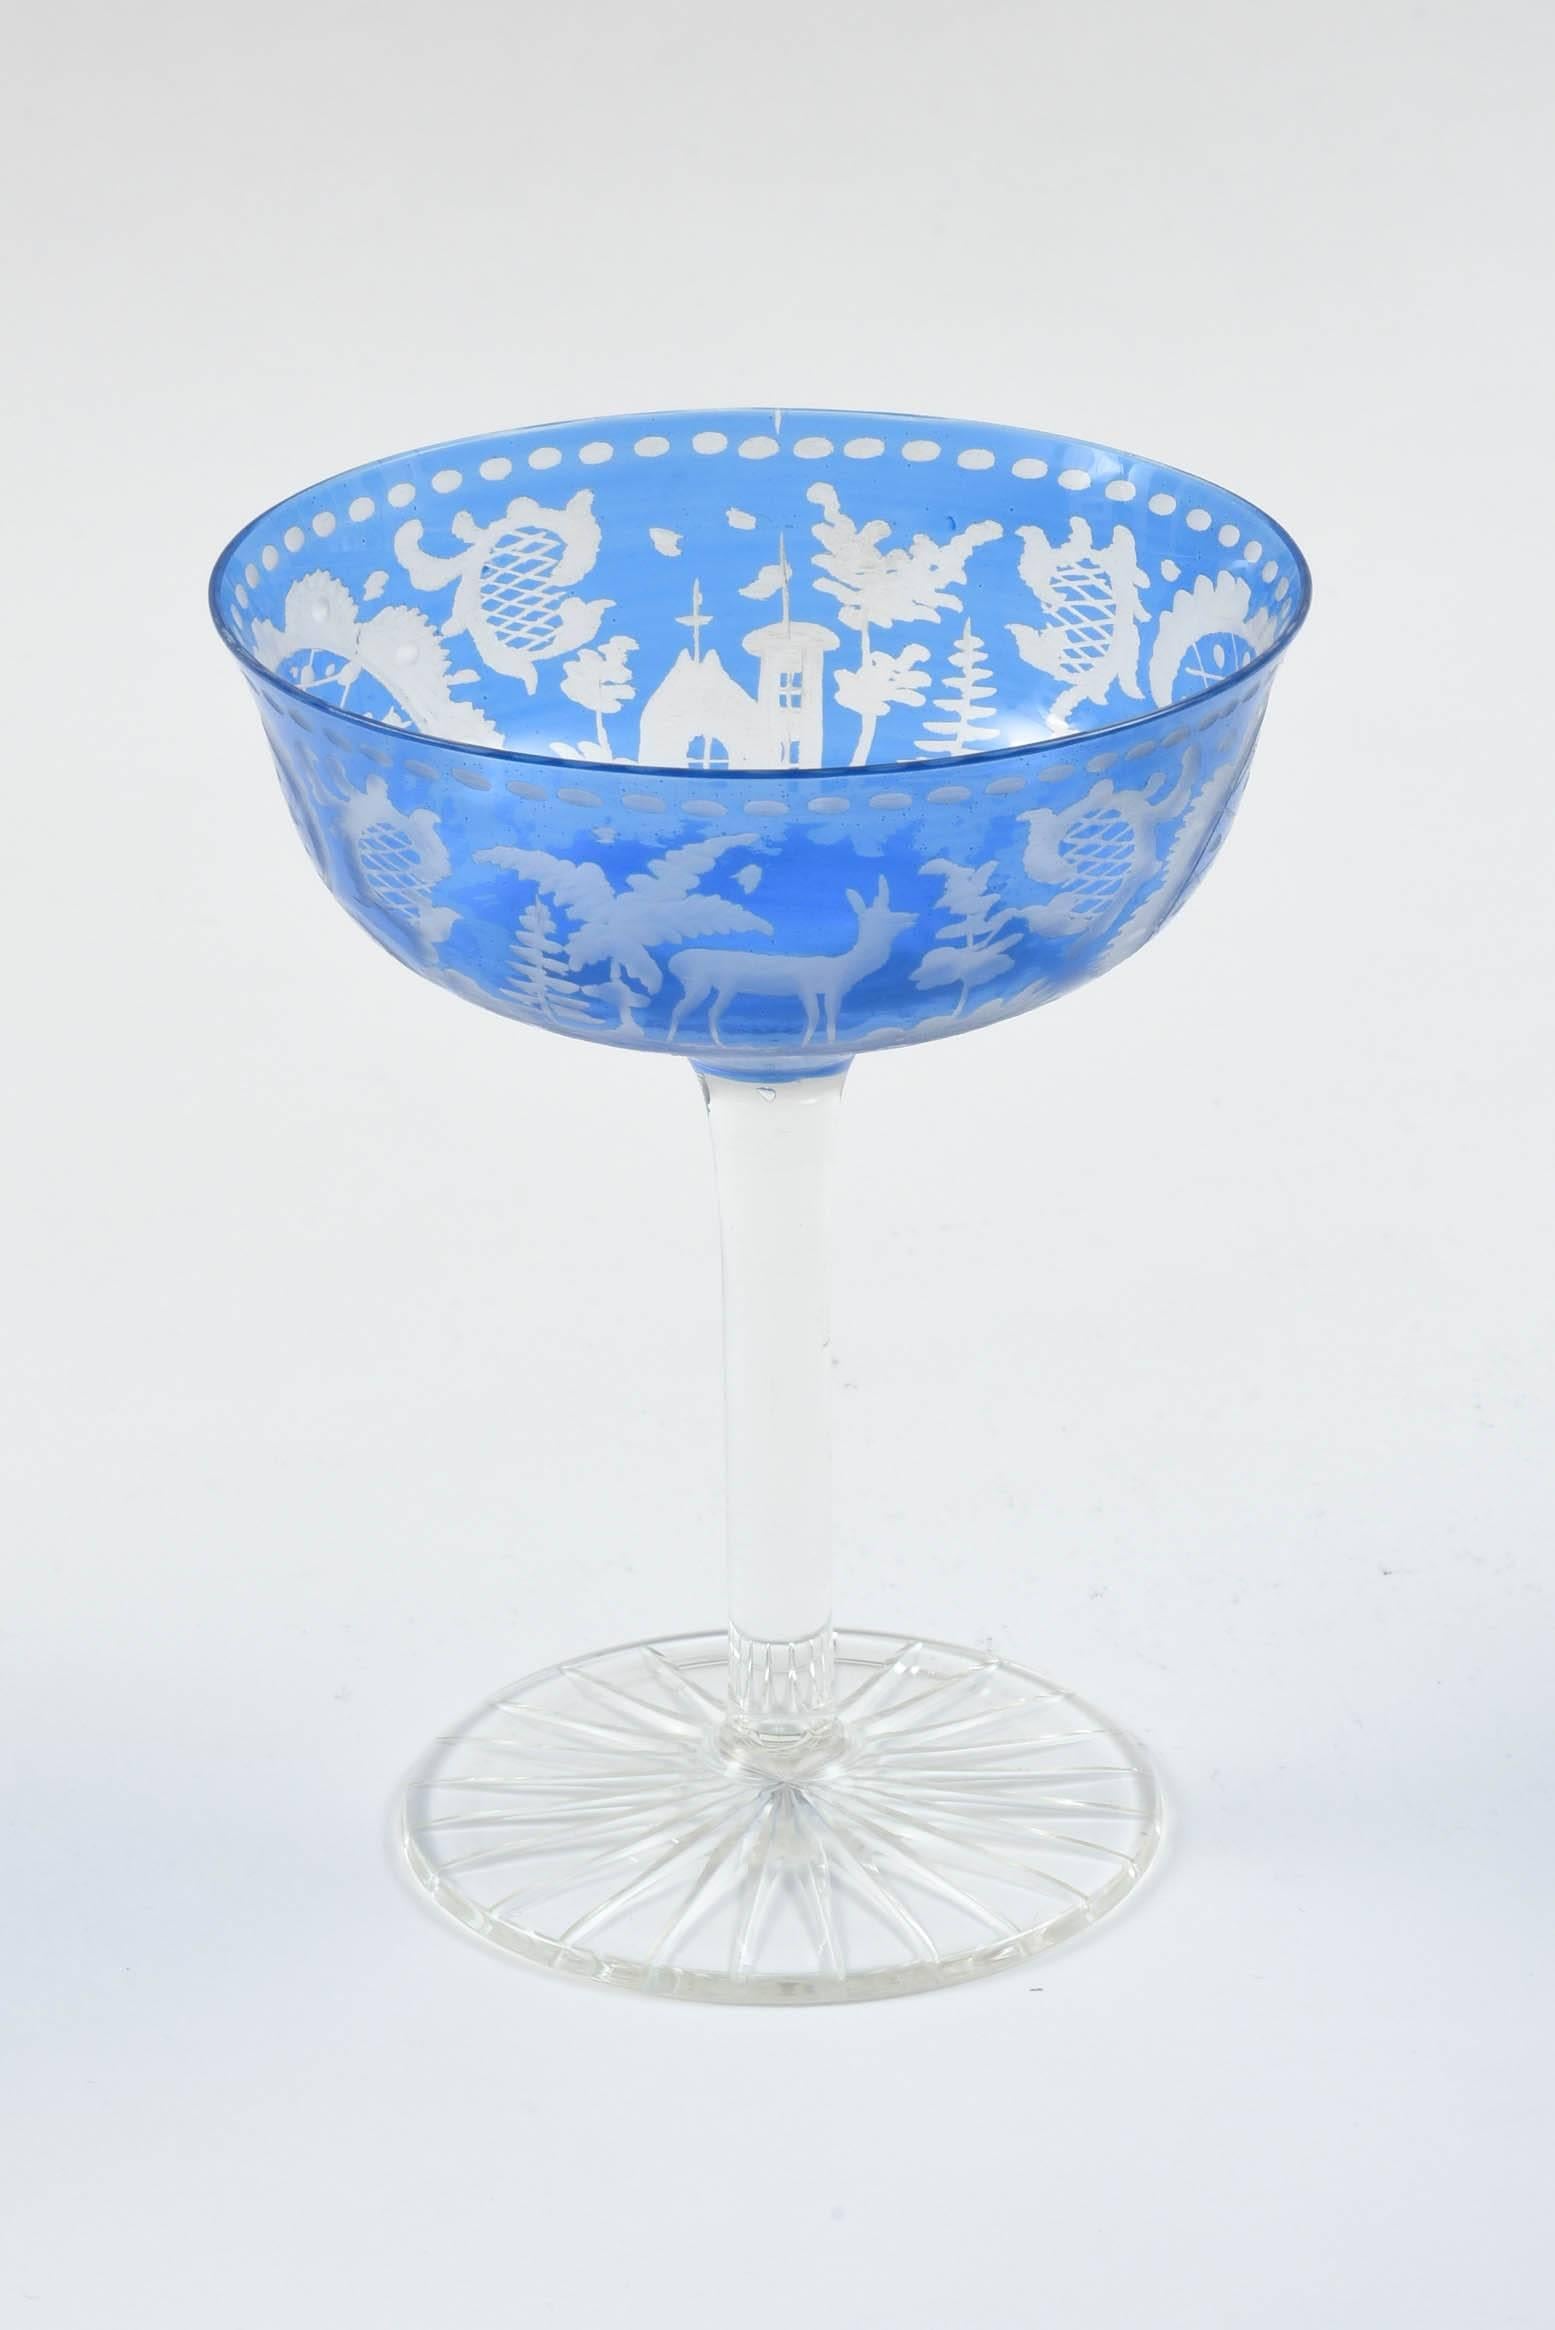 Late 19th Century Blue Crystal Stemware Service for 12, Great Color & Goblet Size. Antique & Rare